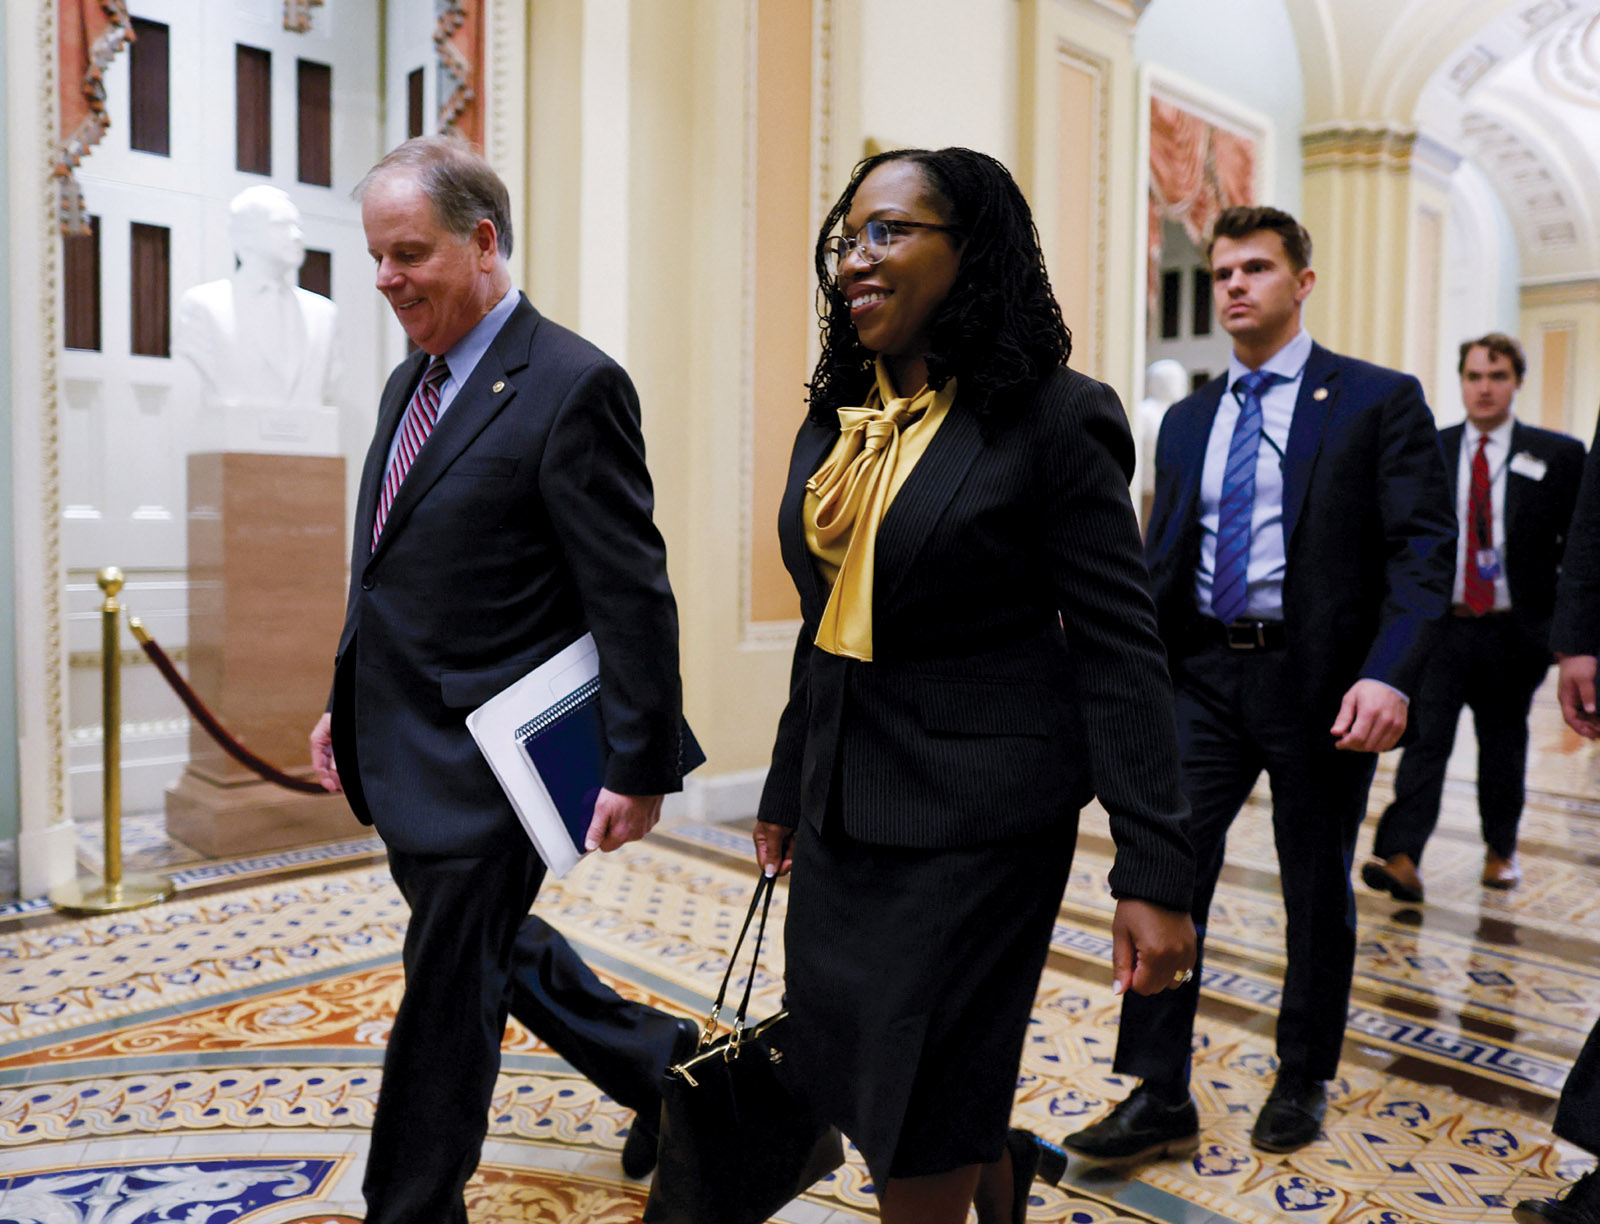 Ketanji Brown Jackson with former US senator Doug Jones after a meeting with Mitch McConnell at the Capitol